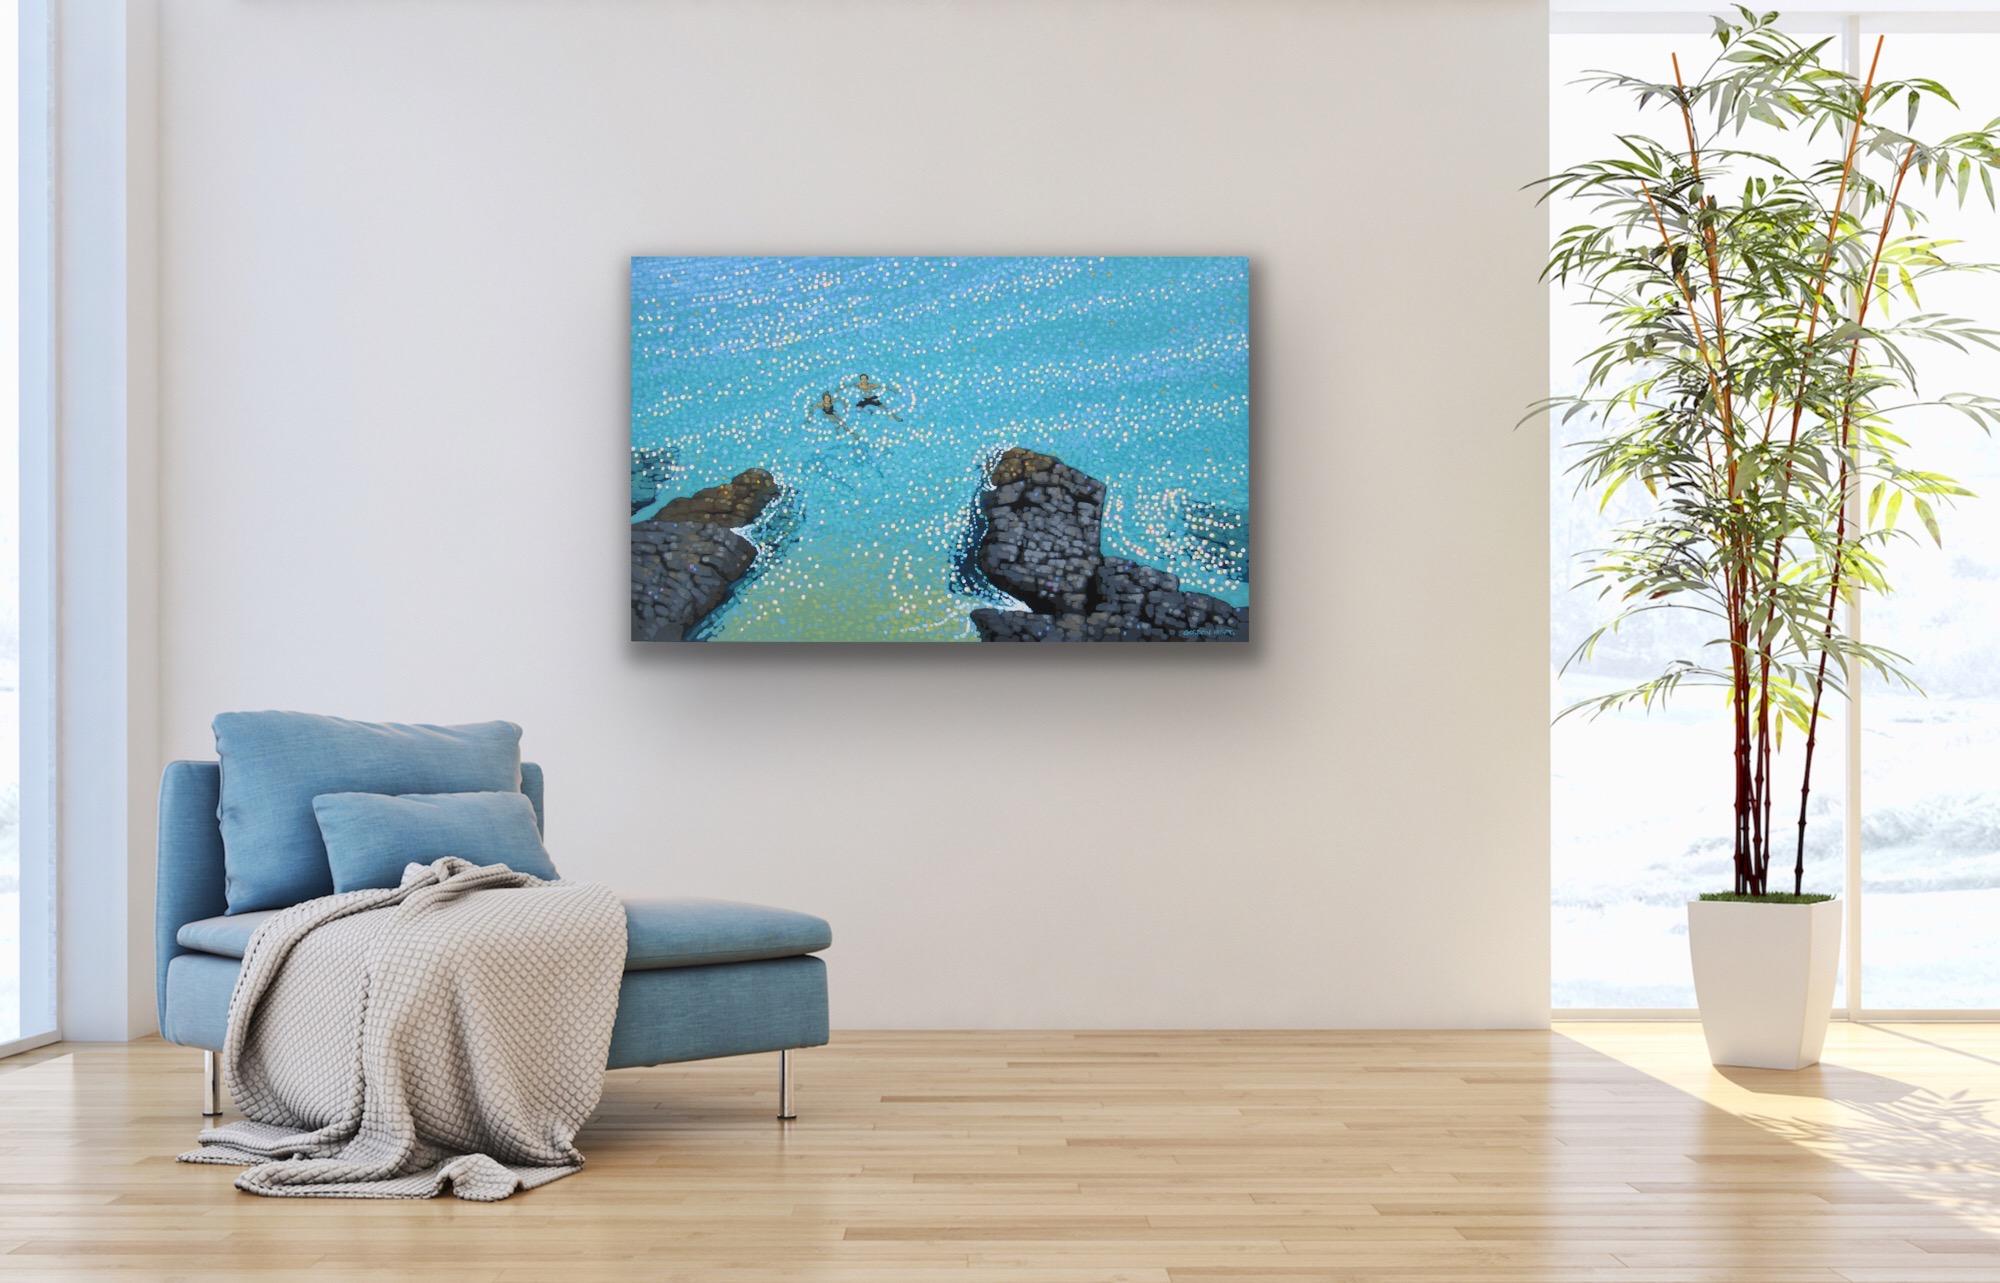 Turquoise Water and Sparkles - Come On In, The Water's Lovely, Cornish Seascape - Painting by Gordon Hunt